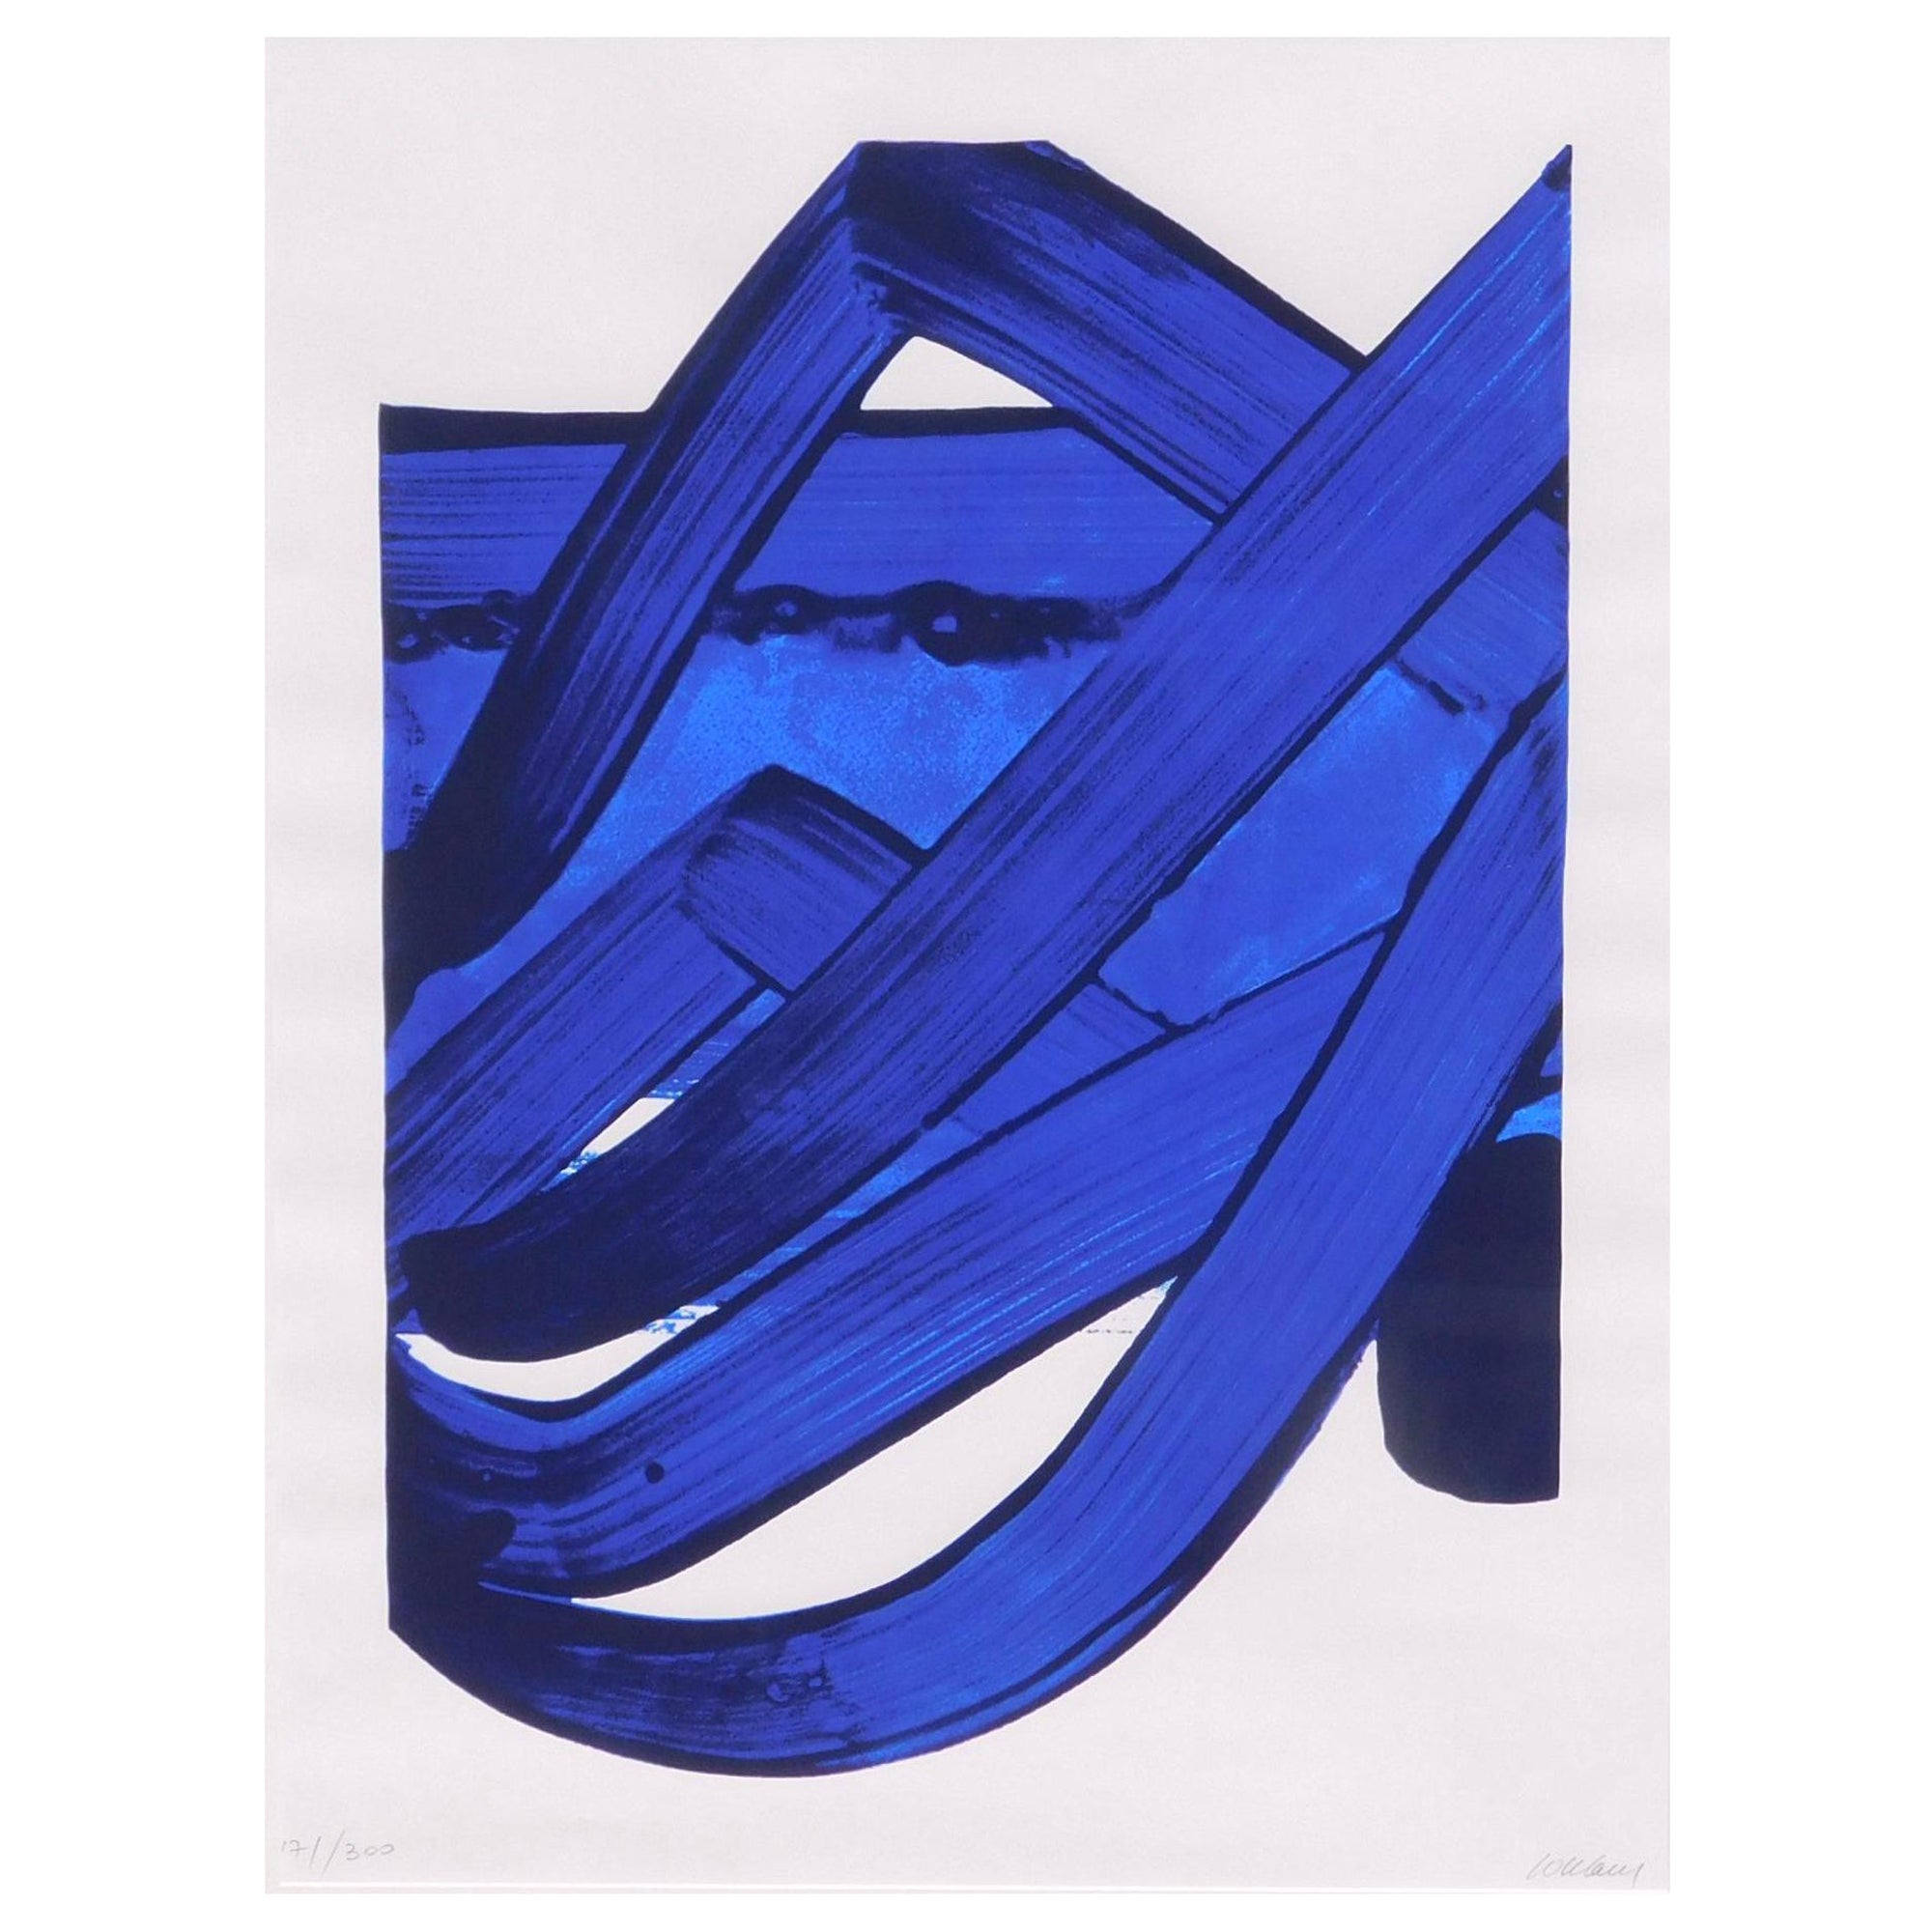 Original Serigraph by Pierre Soulages, 1988, "Seregrapie Olympiad 24 Korea For Sale